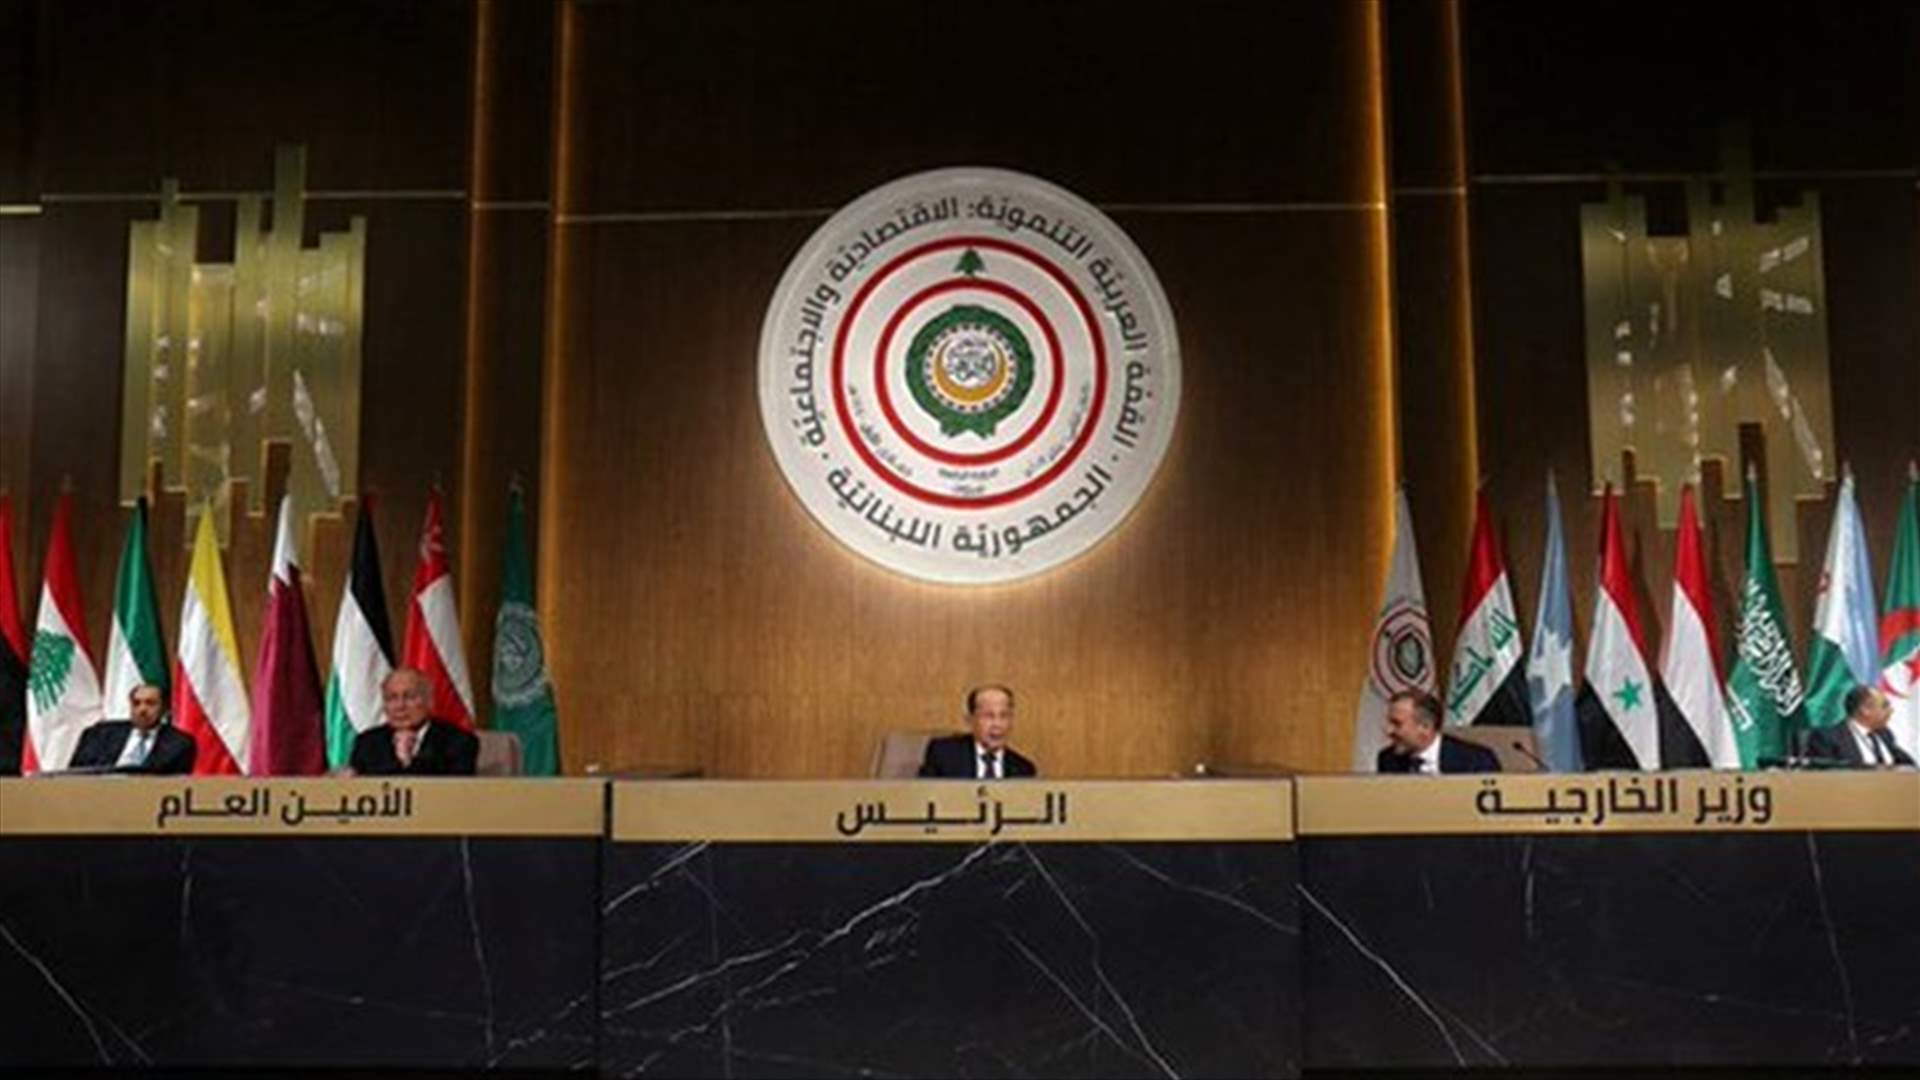 Aoun: Lebanon will follow up on summit’s decisions, strive to implement them